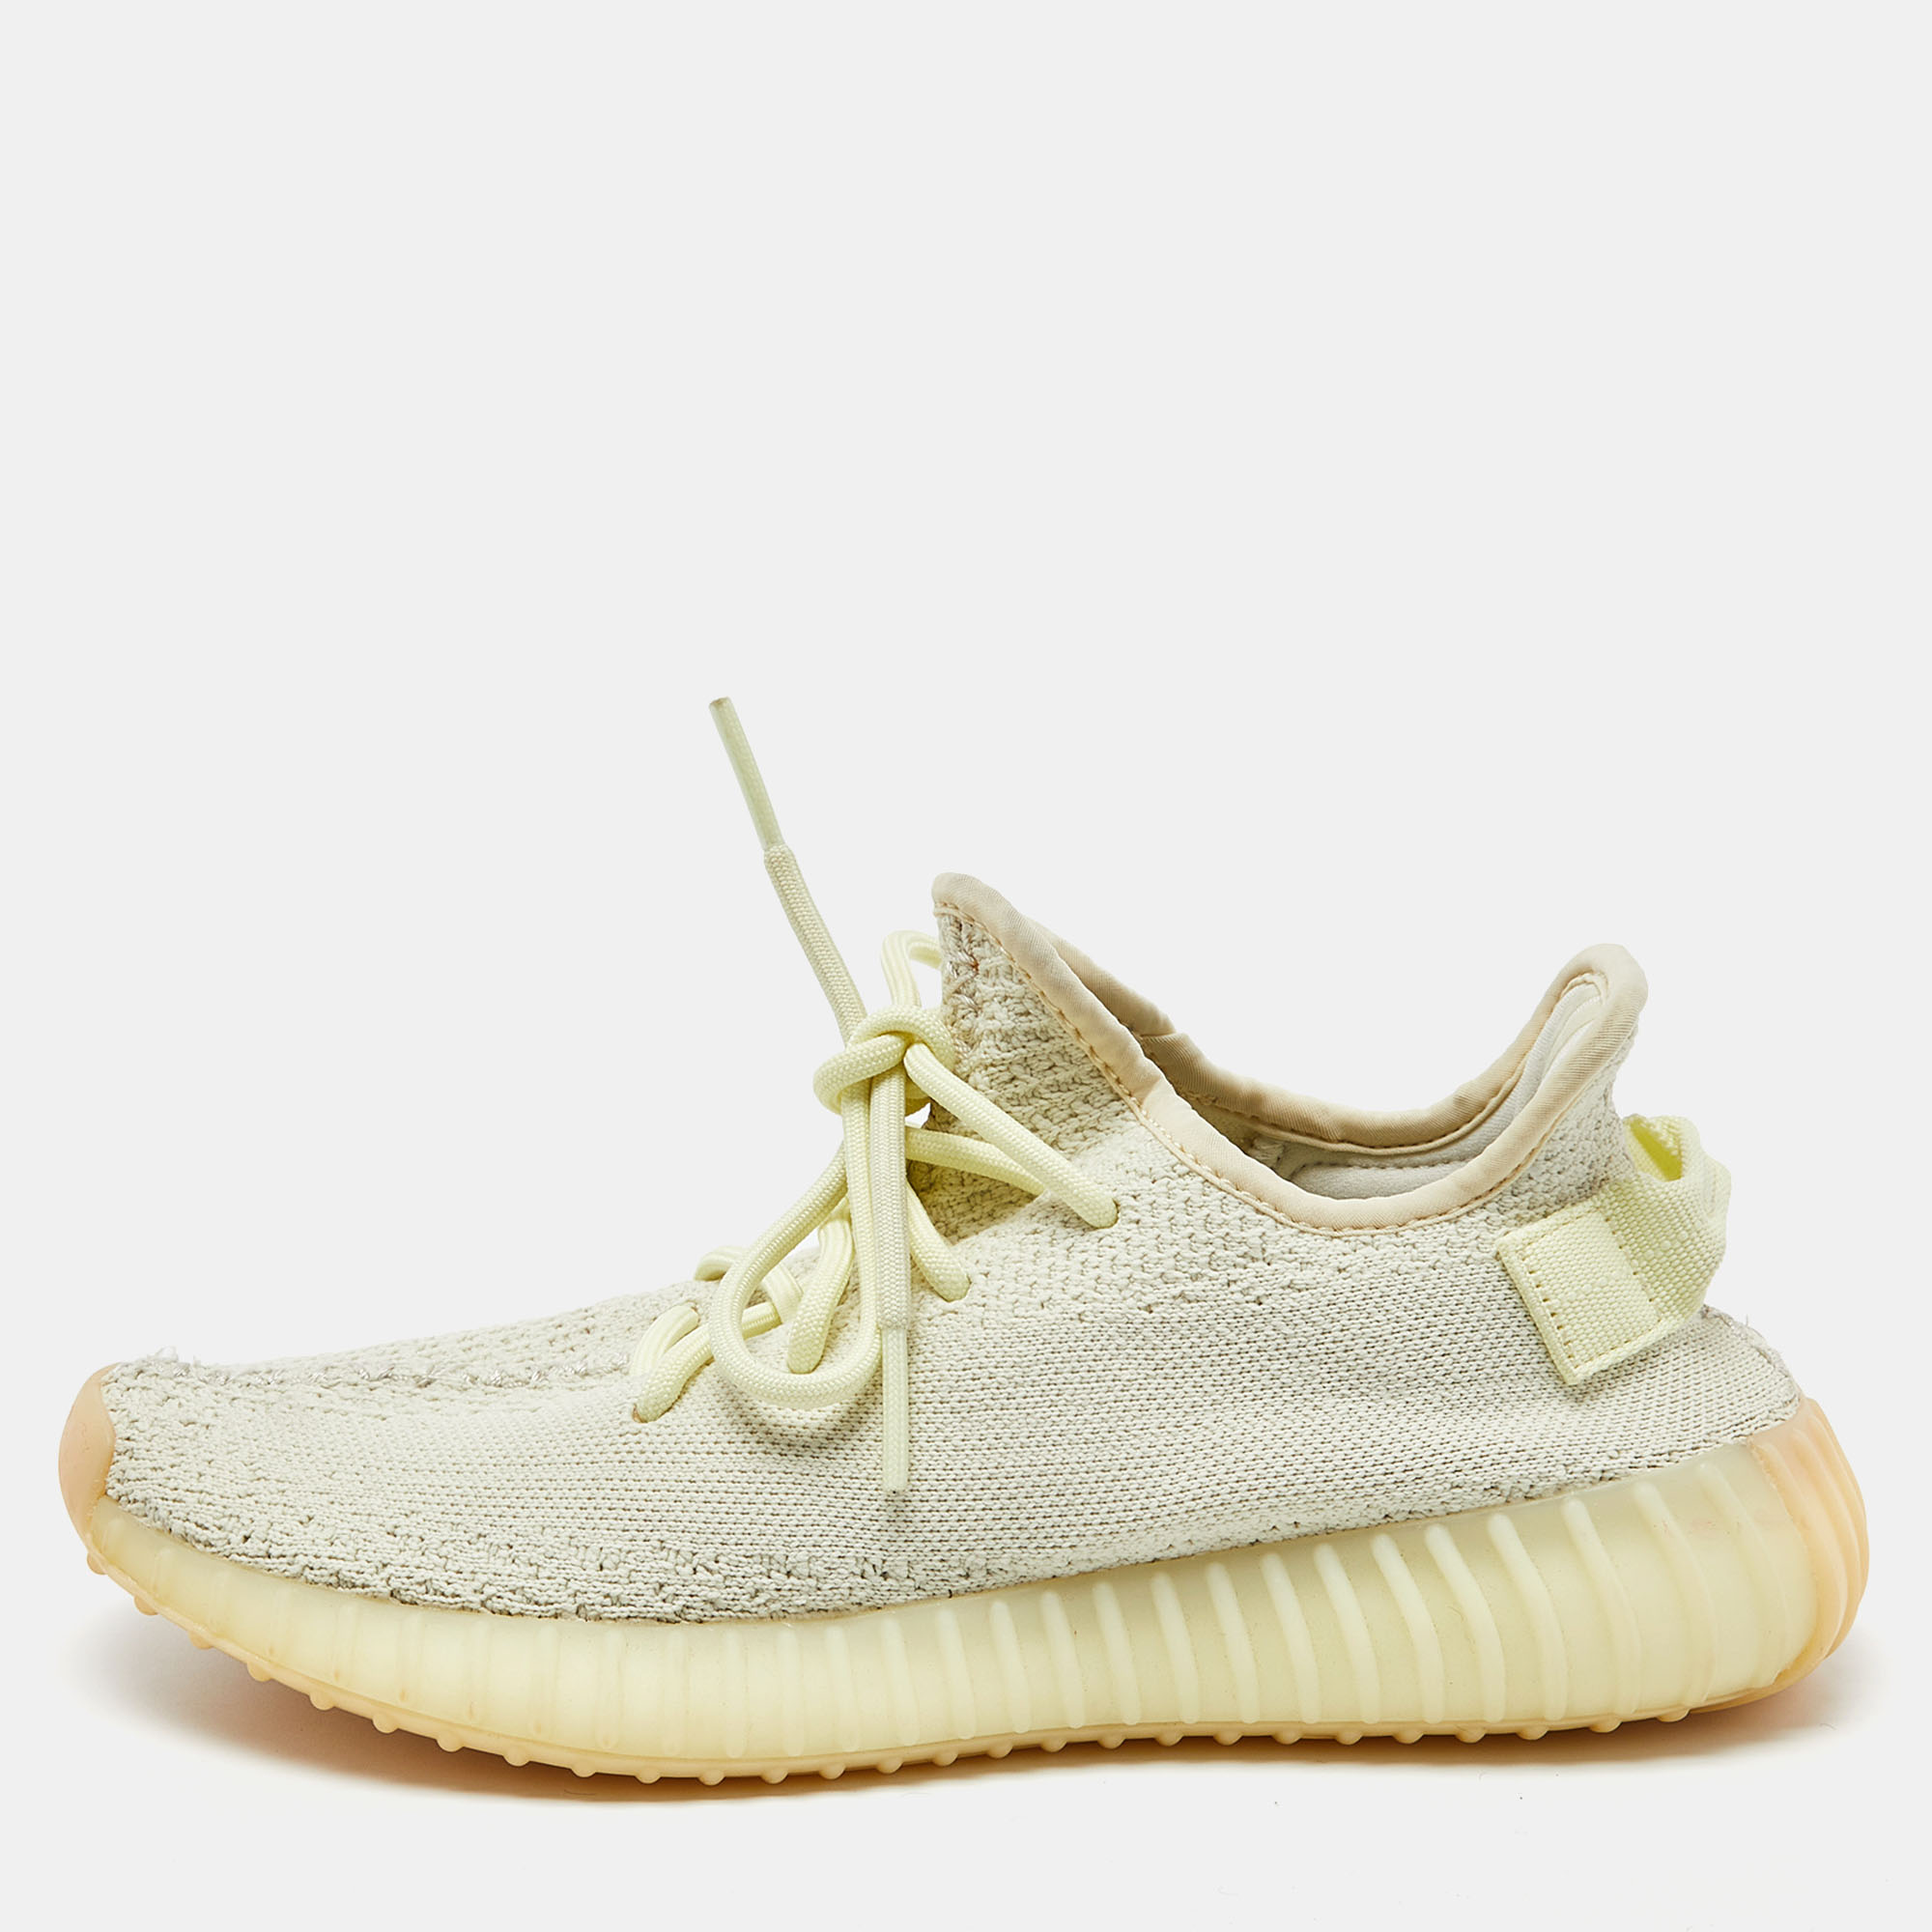 Pre-owned Yeezy X Adidas Green Knit Fabric Boost 350 V2 Butter Sneakers Size 39 1/3